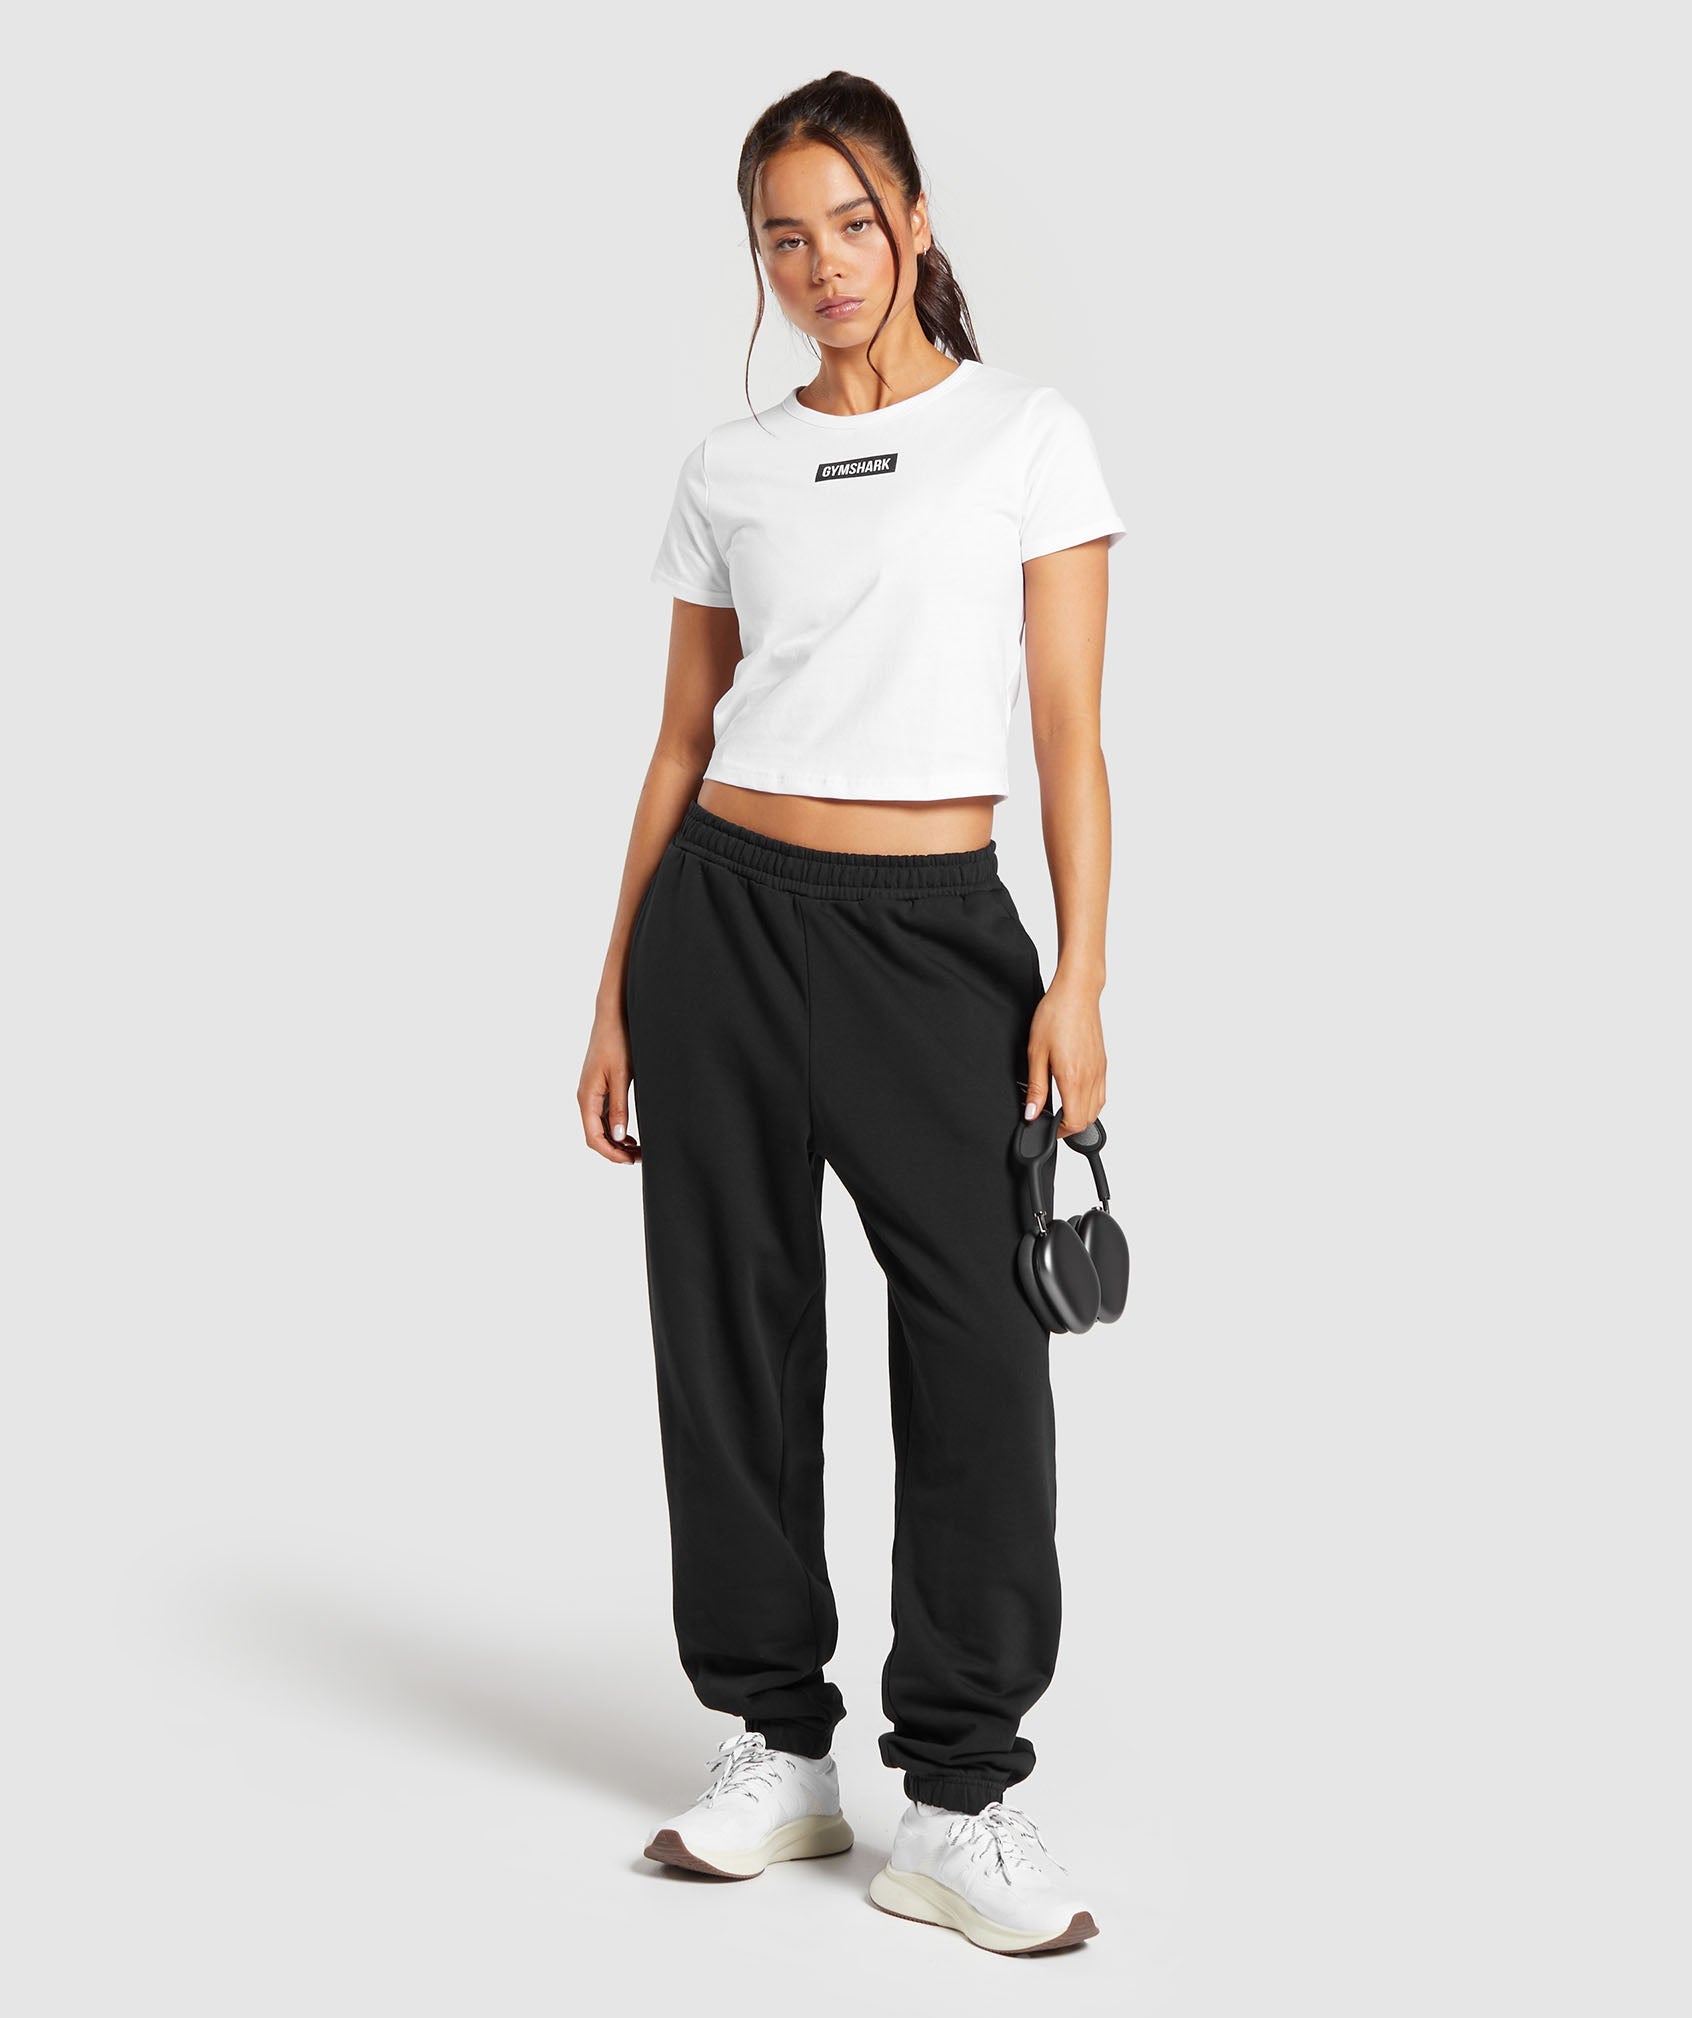 Block Crop Top in White - view 6